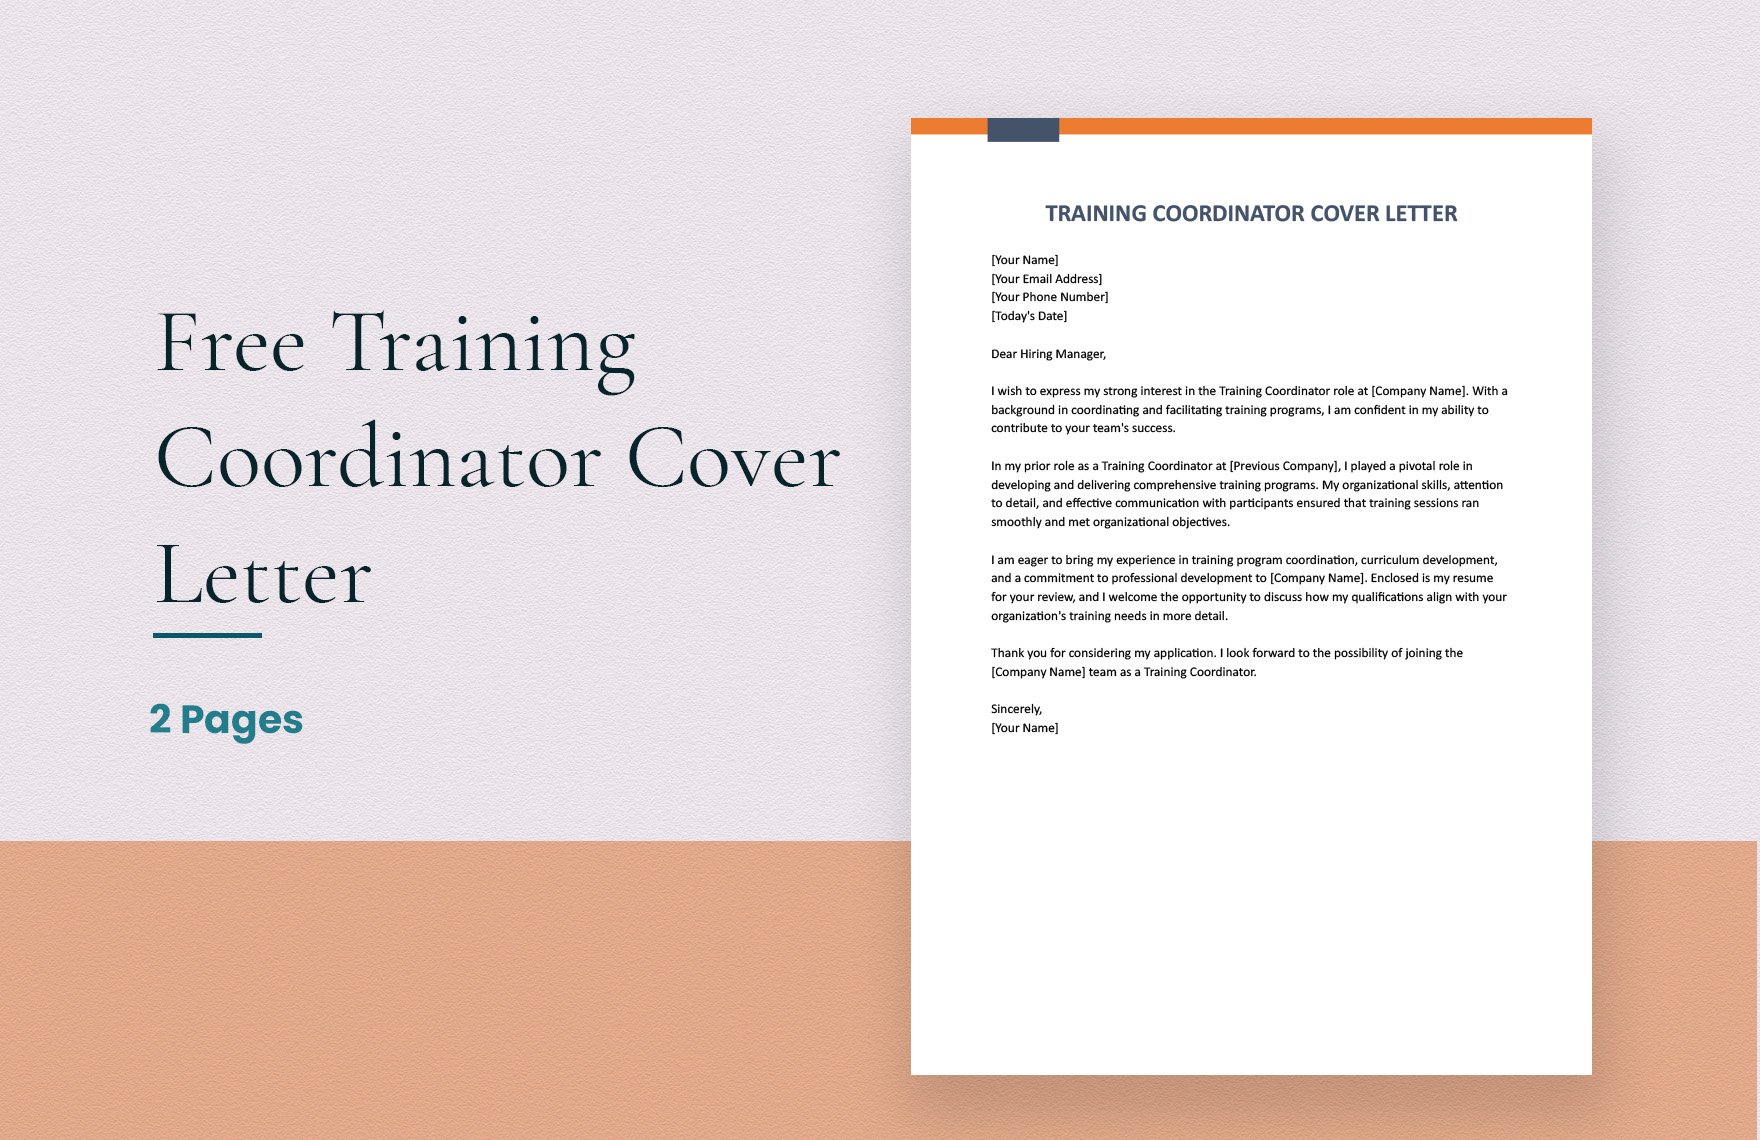 Training Coordinator Cover Letter in Word, Google Docs